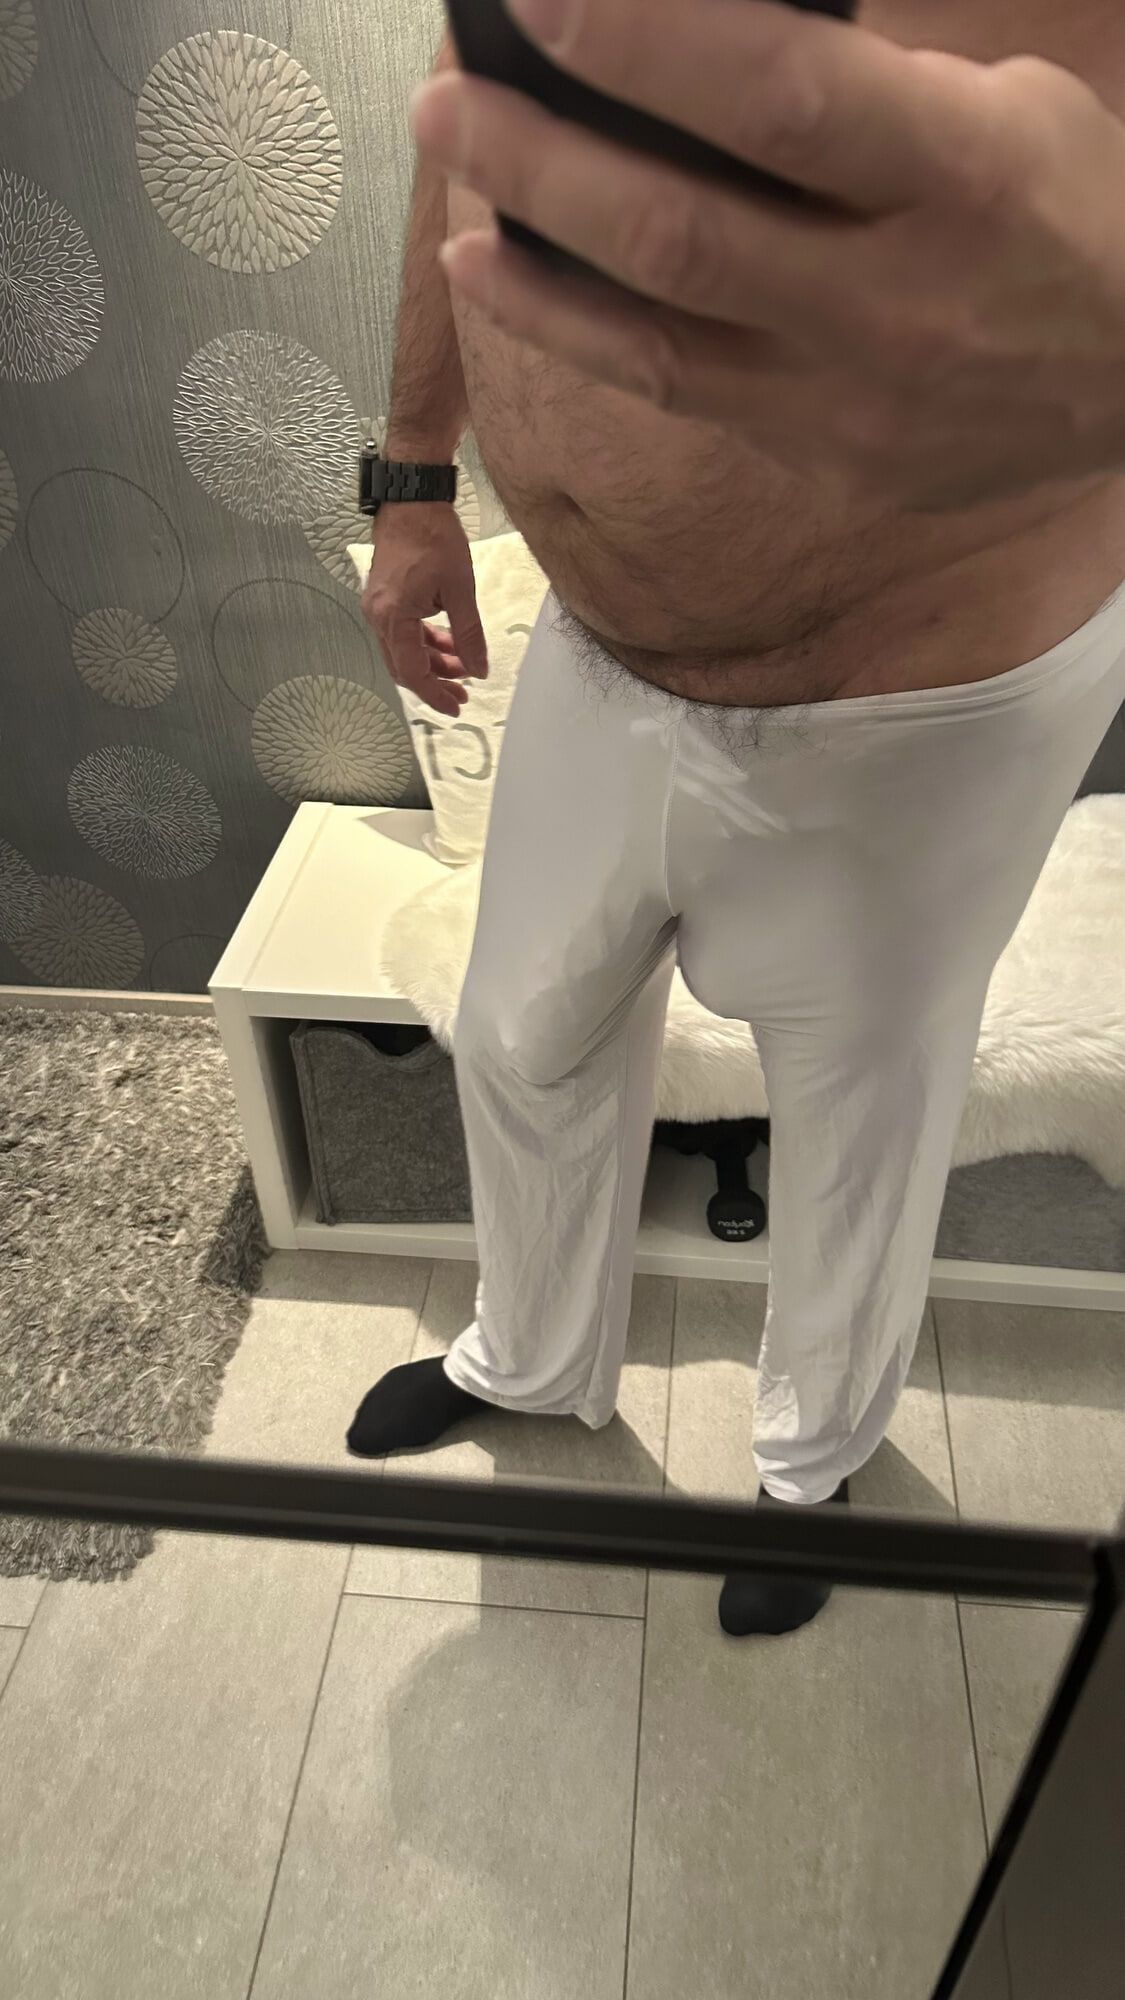 XXL Cock with Pants